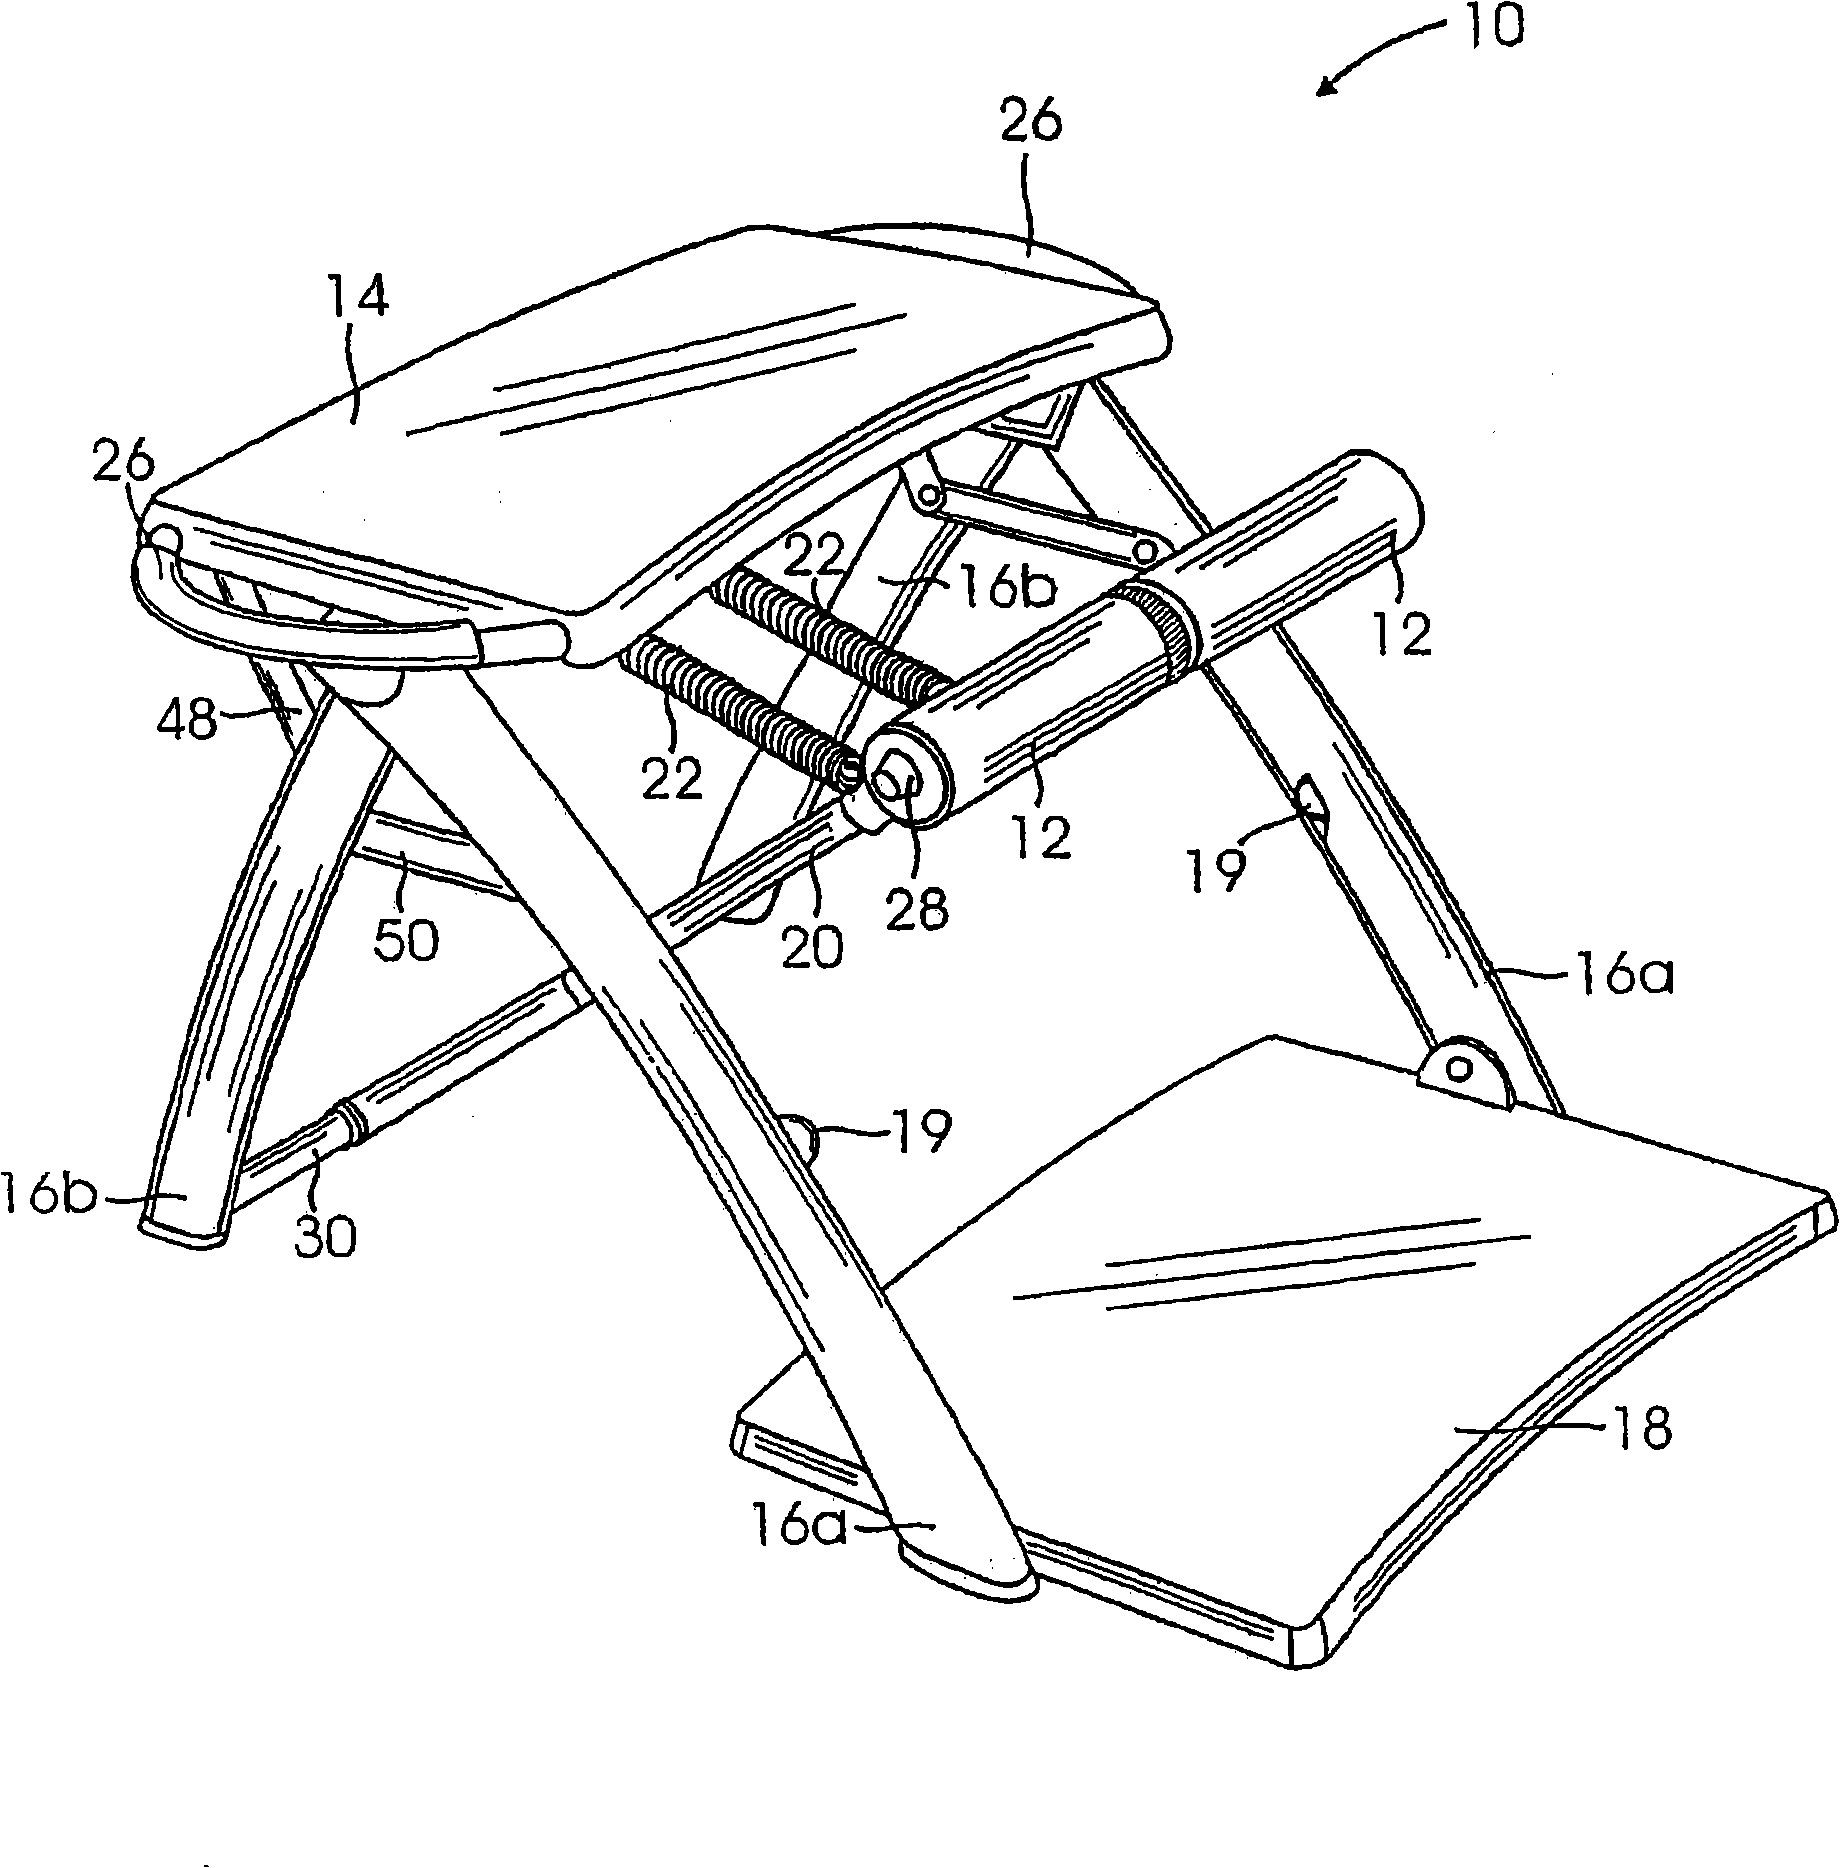 Exercise chair